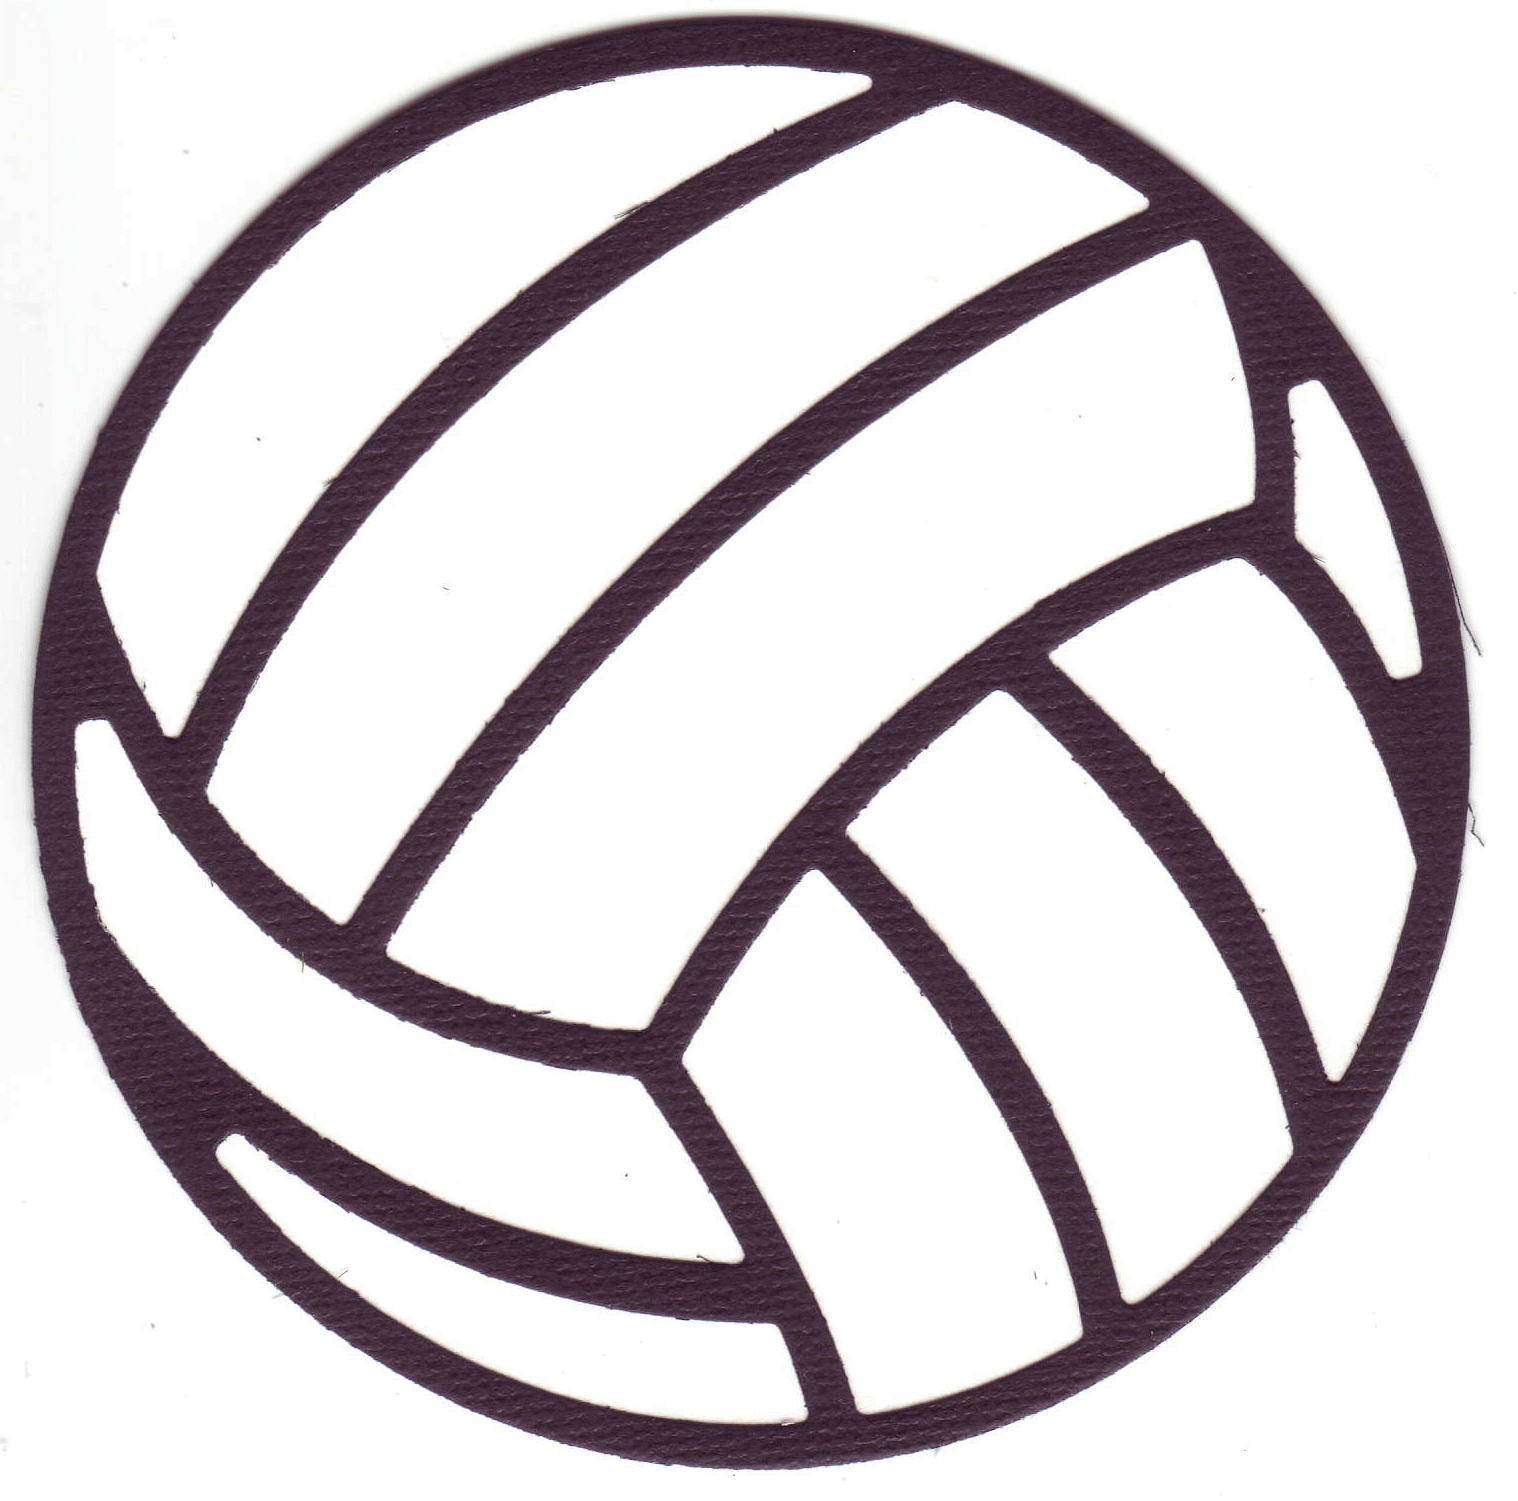 Free images download clip. Clipart volleyball simple